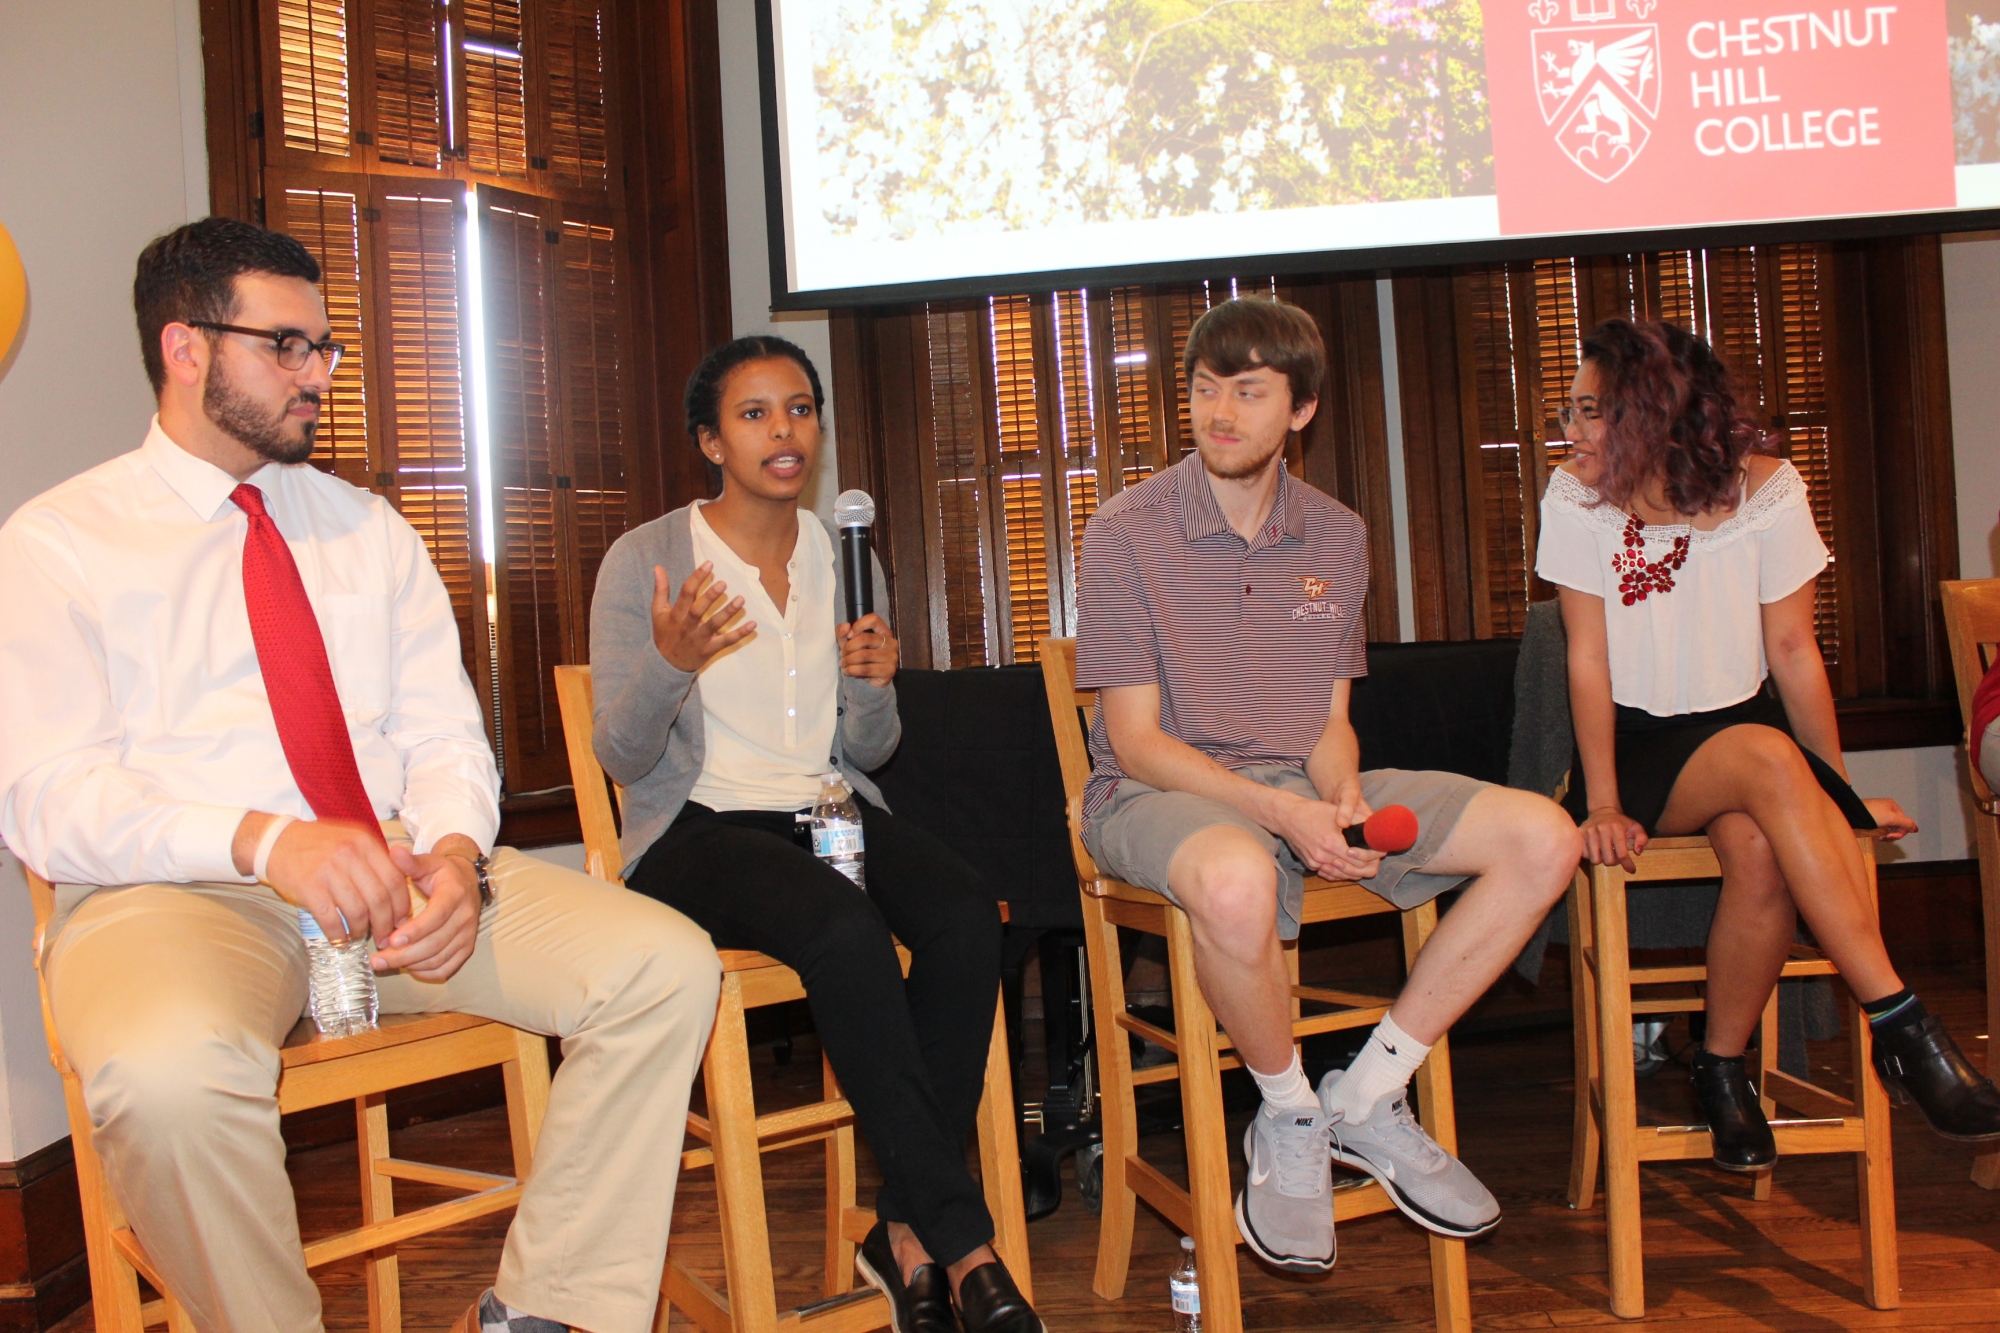 Members of the student panel, Kristian Hernandez (far left), Andrew Conboy (right) and Jaida Zabala (far right) listen intently as Liz Legesse (left) shares her experiences with studying abroad.